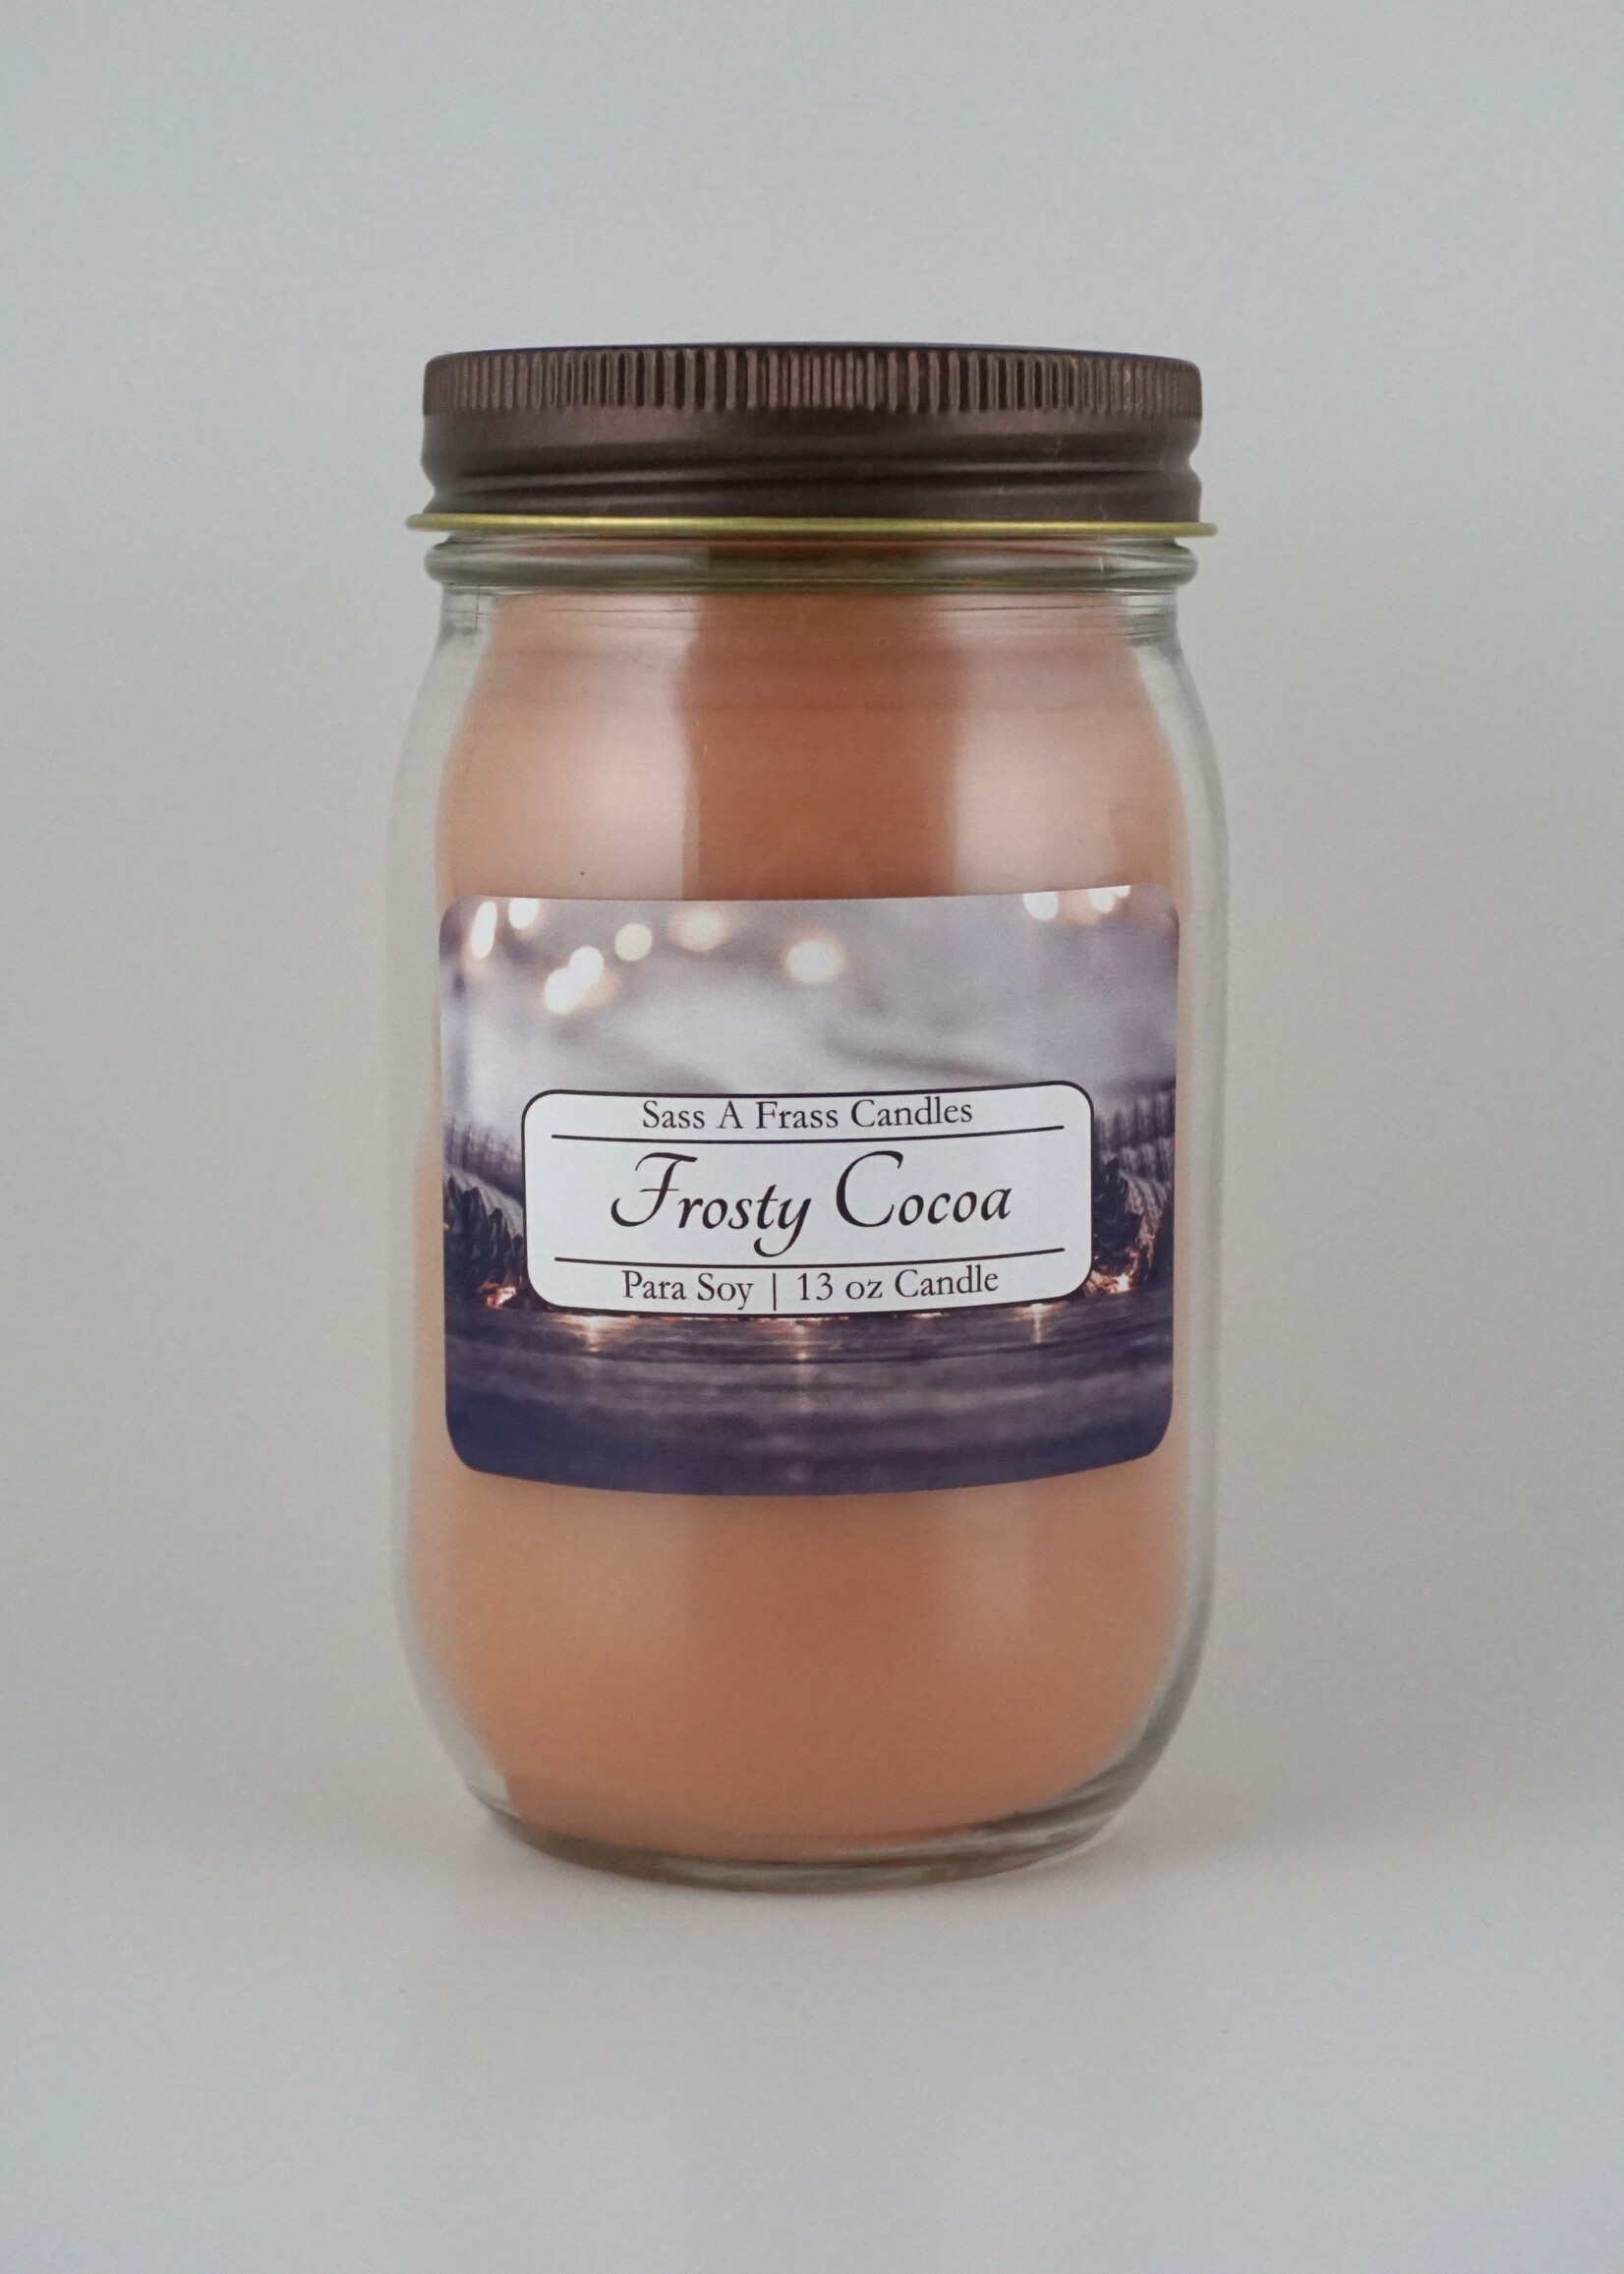 Frosty Cocoa 13 oz Candle